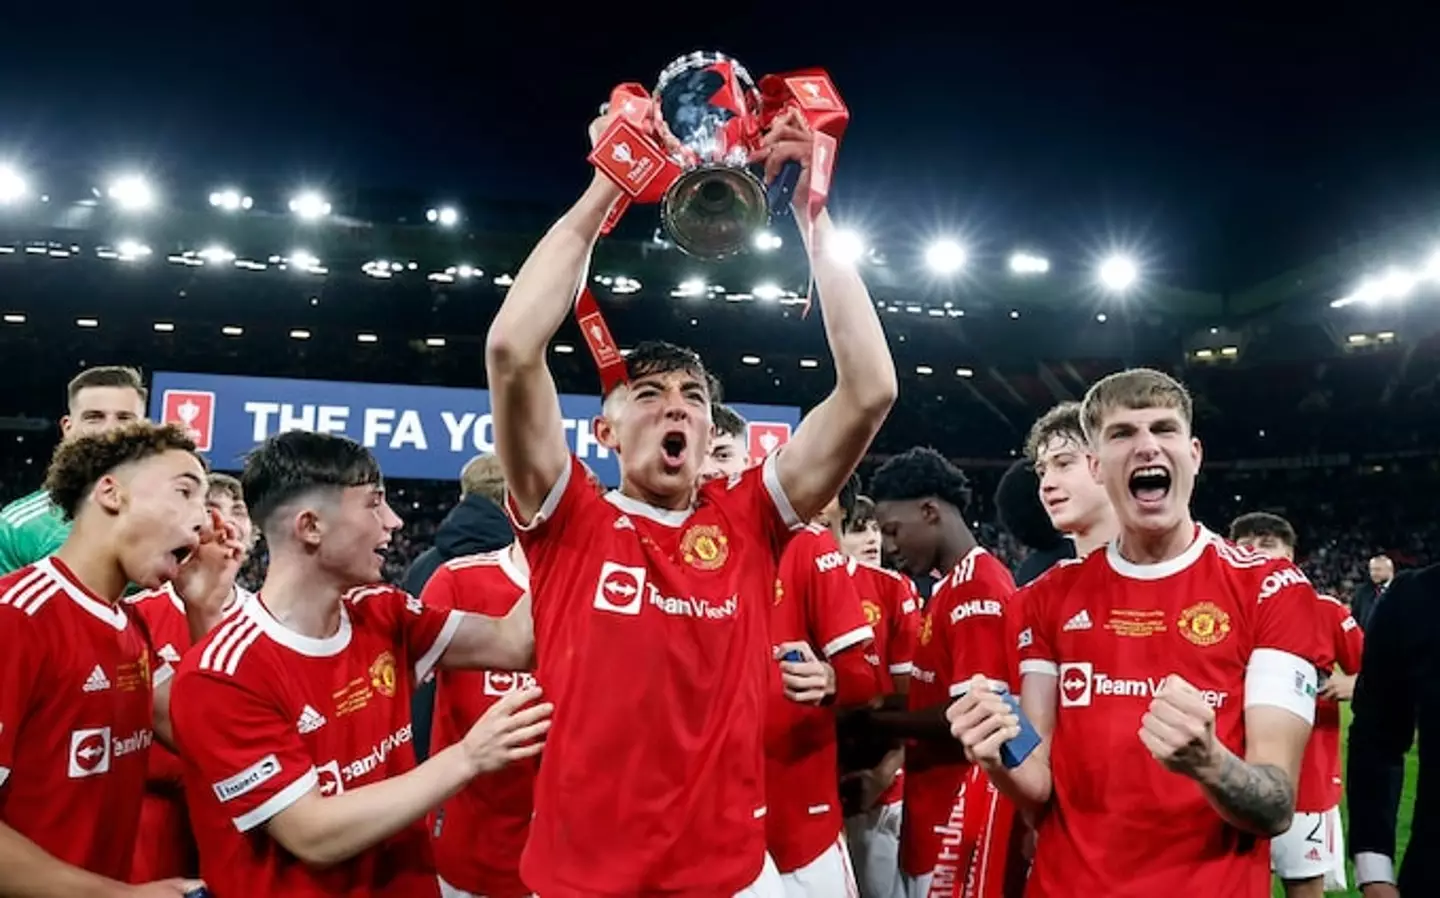 Manchester United players celebrate with the FA Youth Cup trophy after beating Nottingham Forest in the final at Old Trafford |